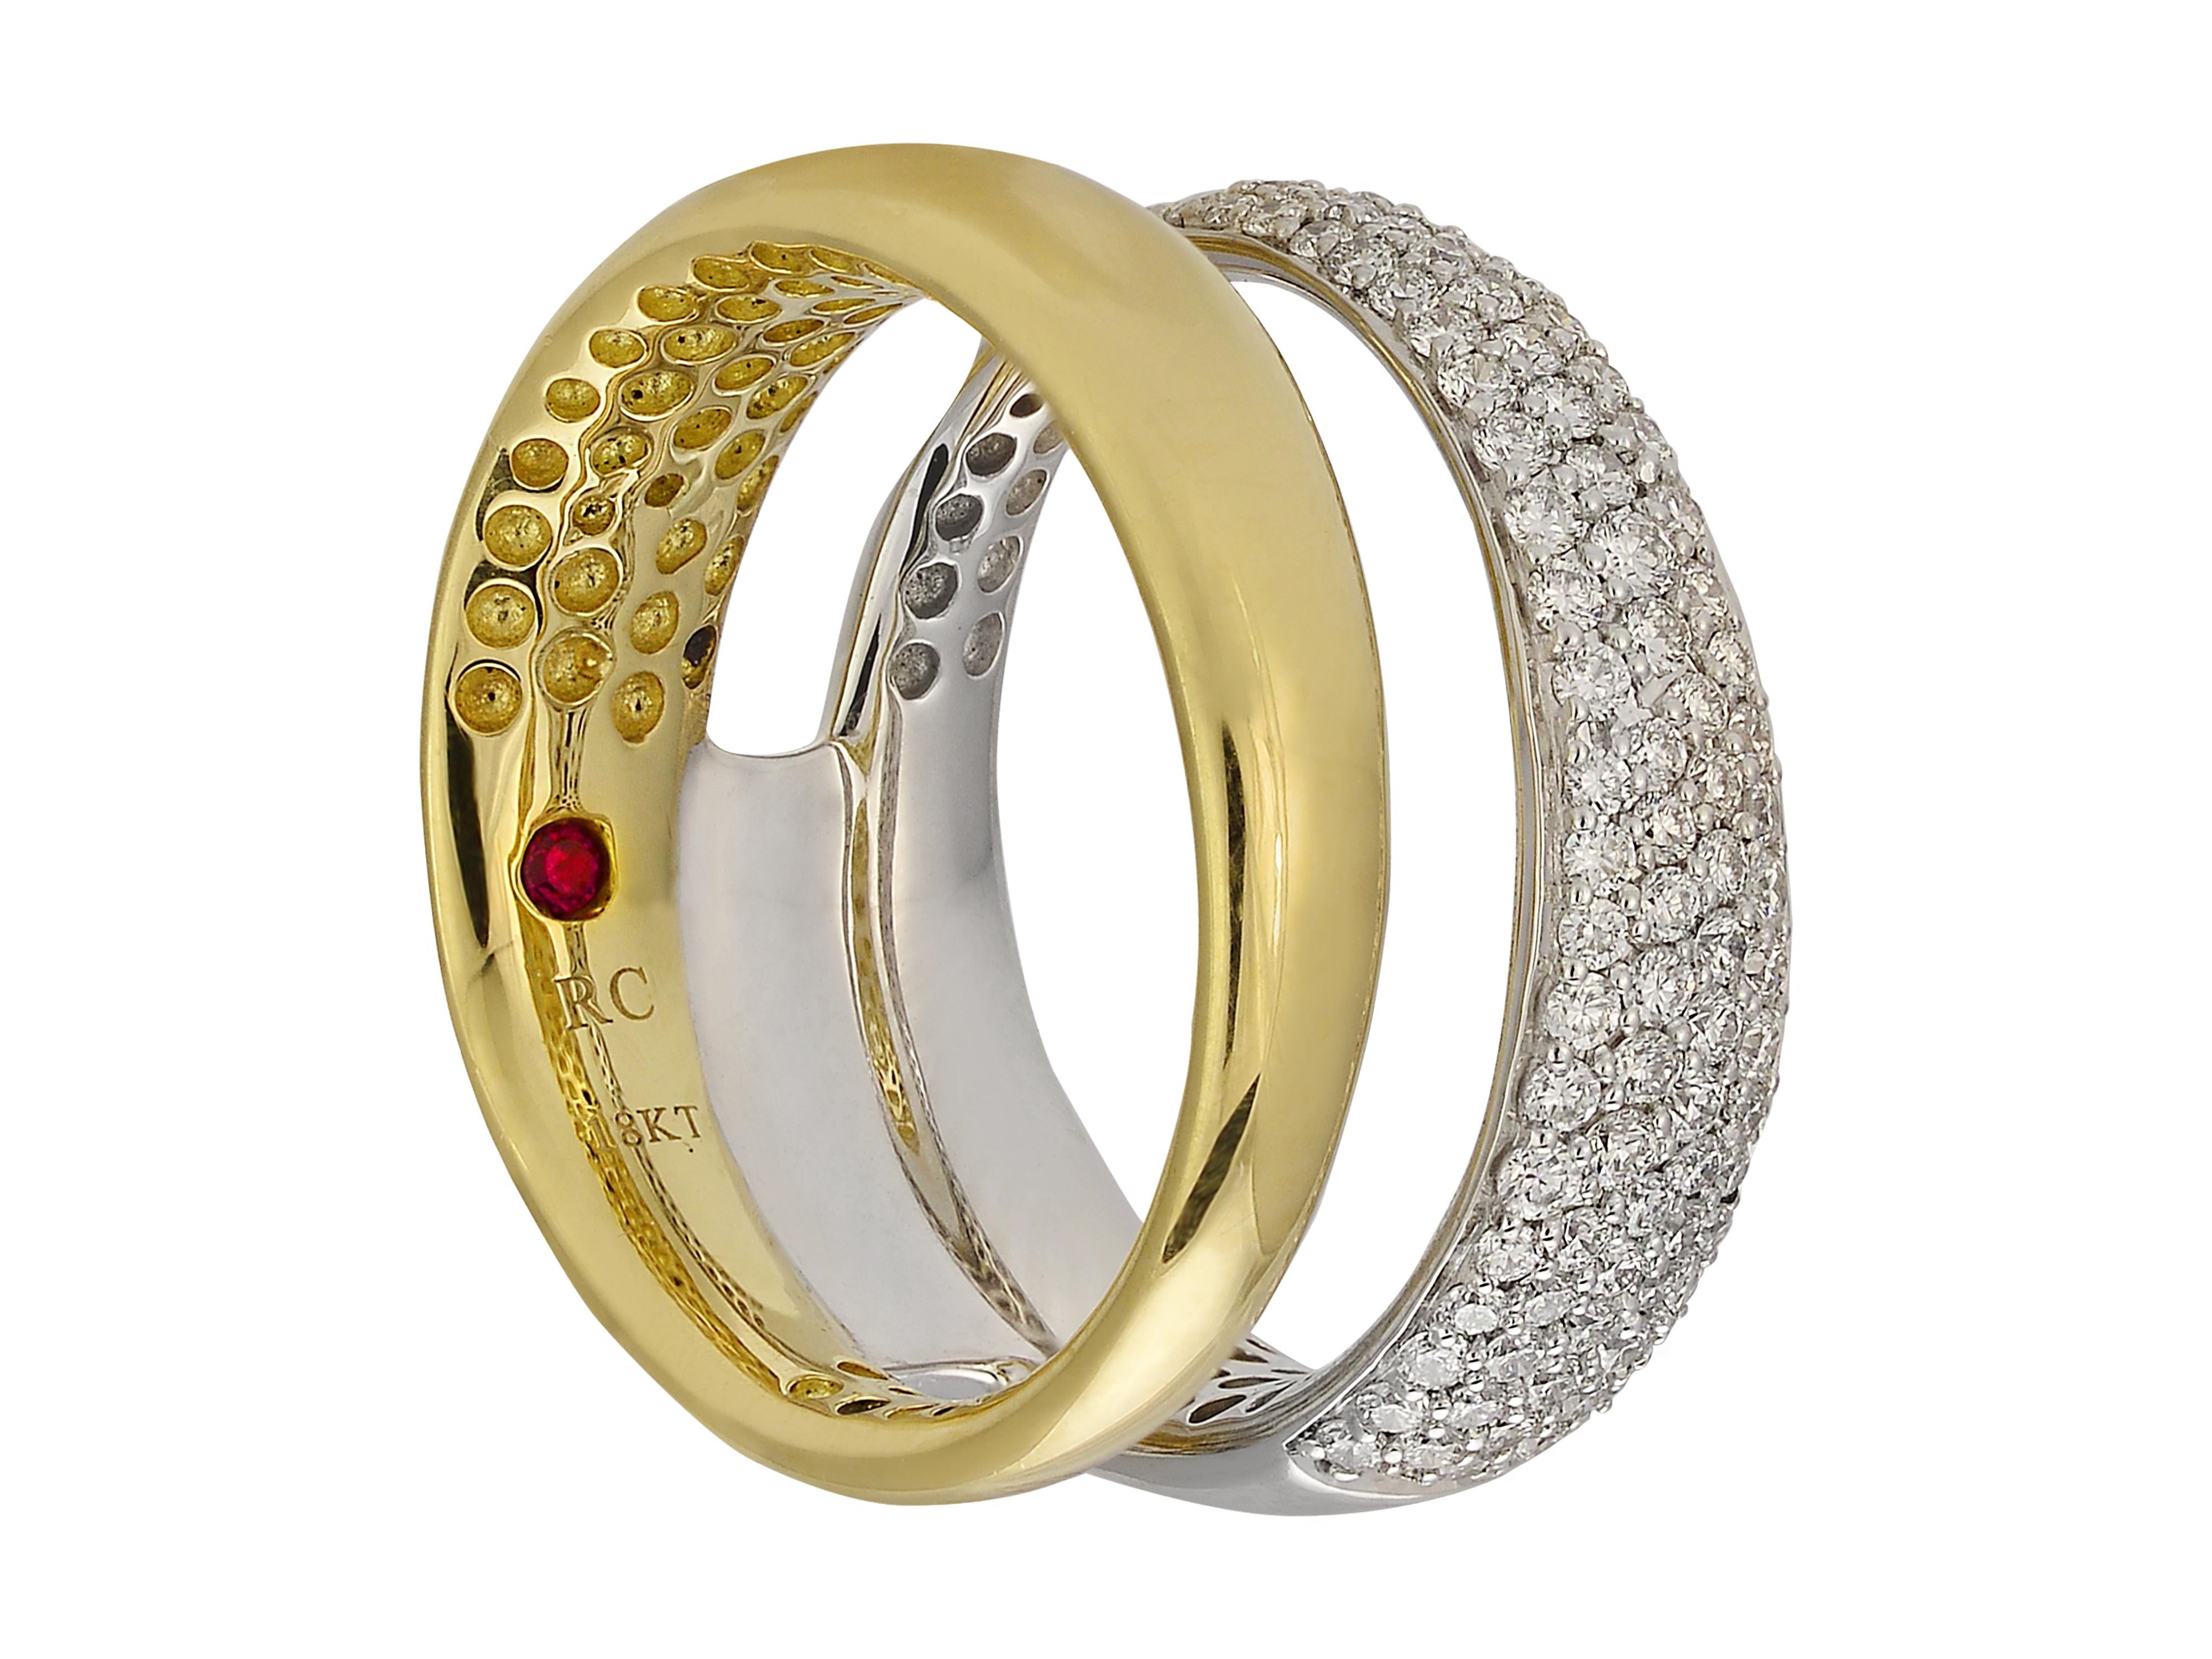 18 karat white and yellow gold pave diamond ring from Roberto Coin Scalare Collection. The ring design is connected in the back, giving the illusion of two stacked rings in the front. The prong-set round brilliant cut diamonds total 0.68 carats,